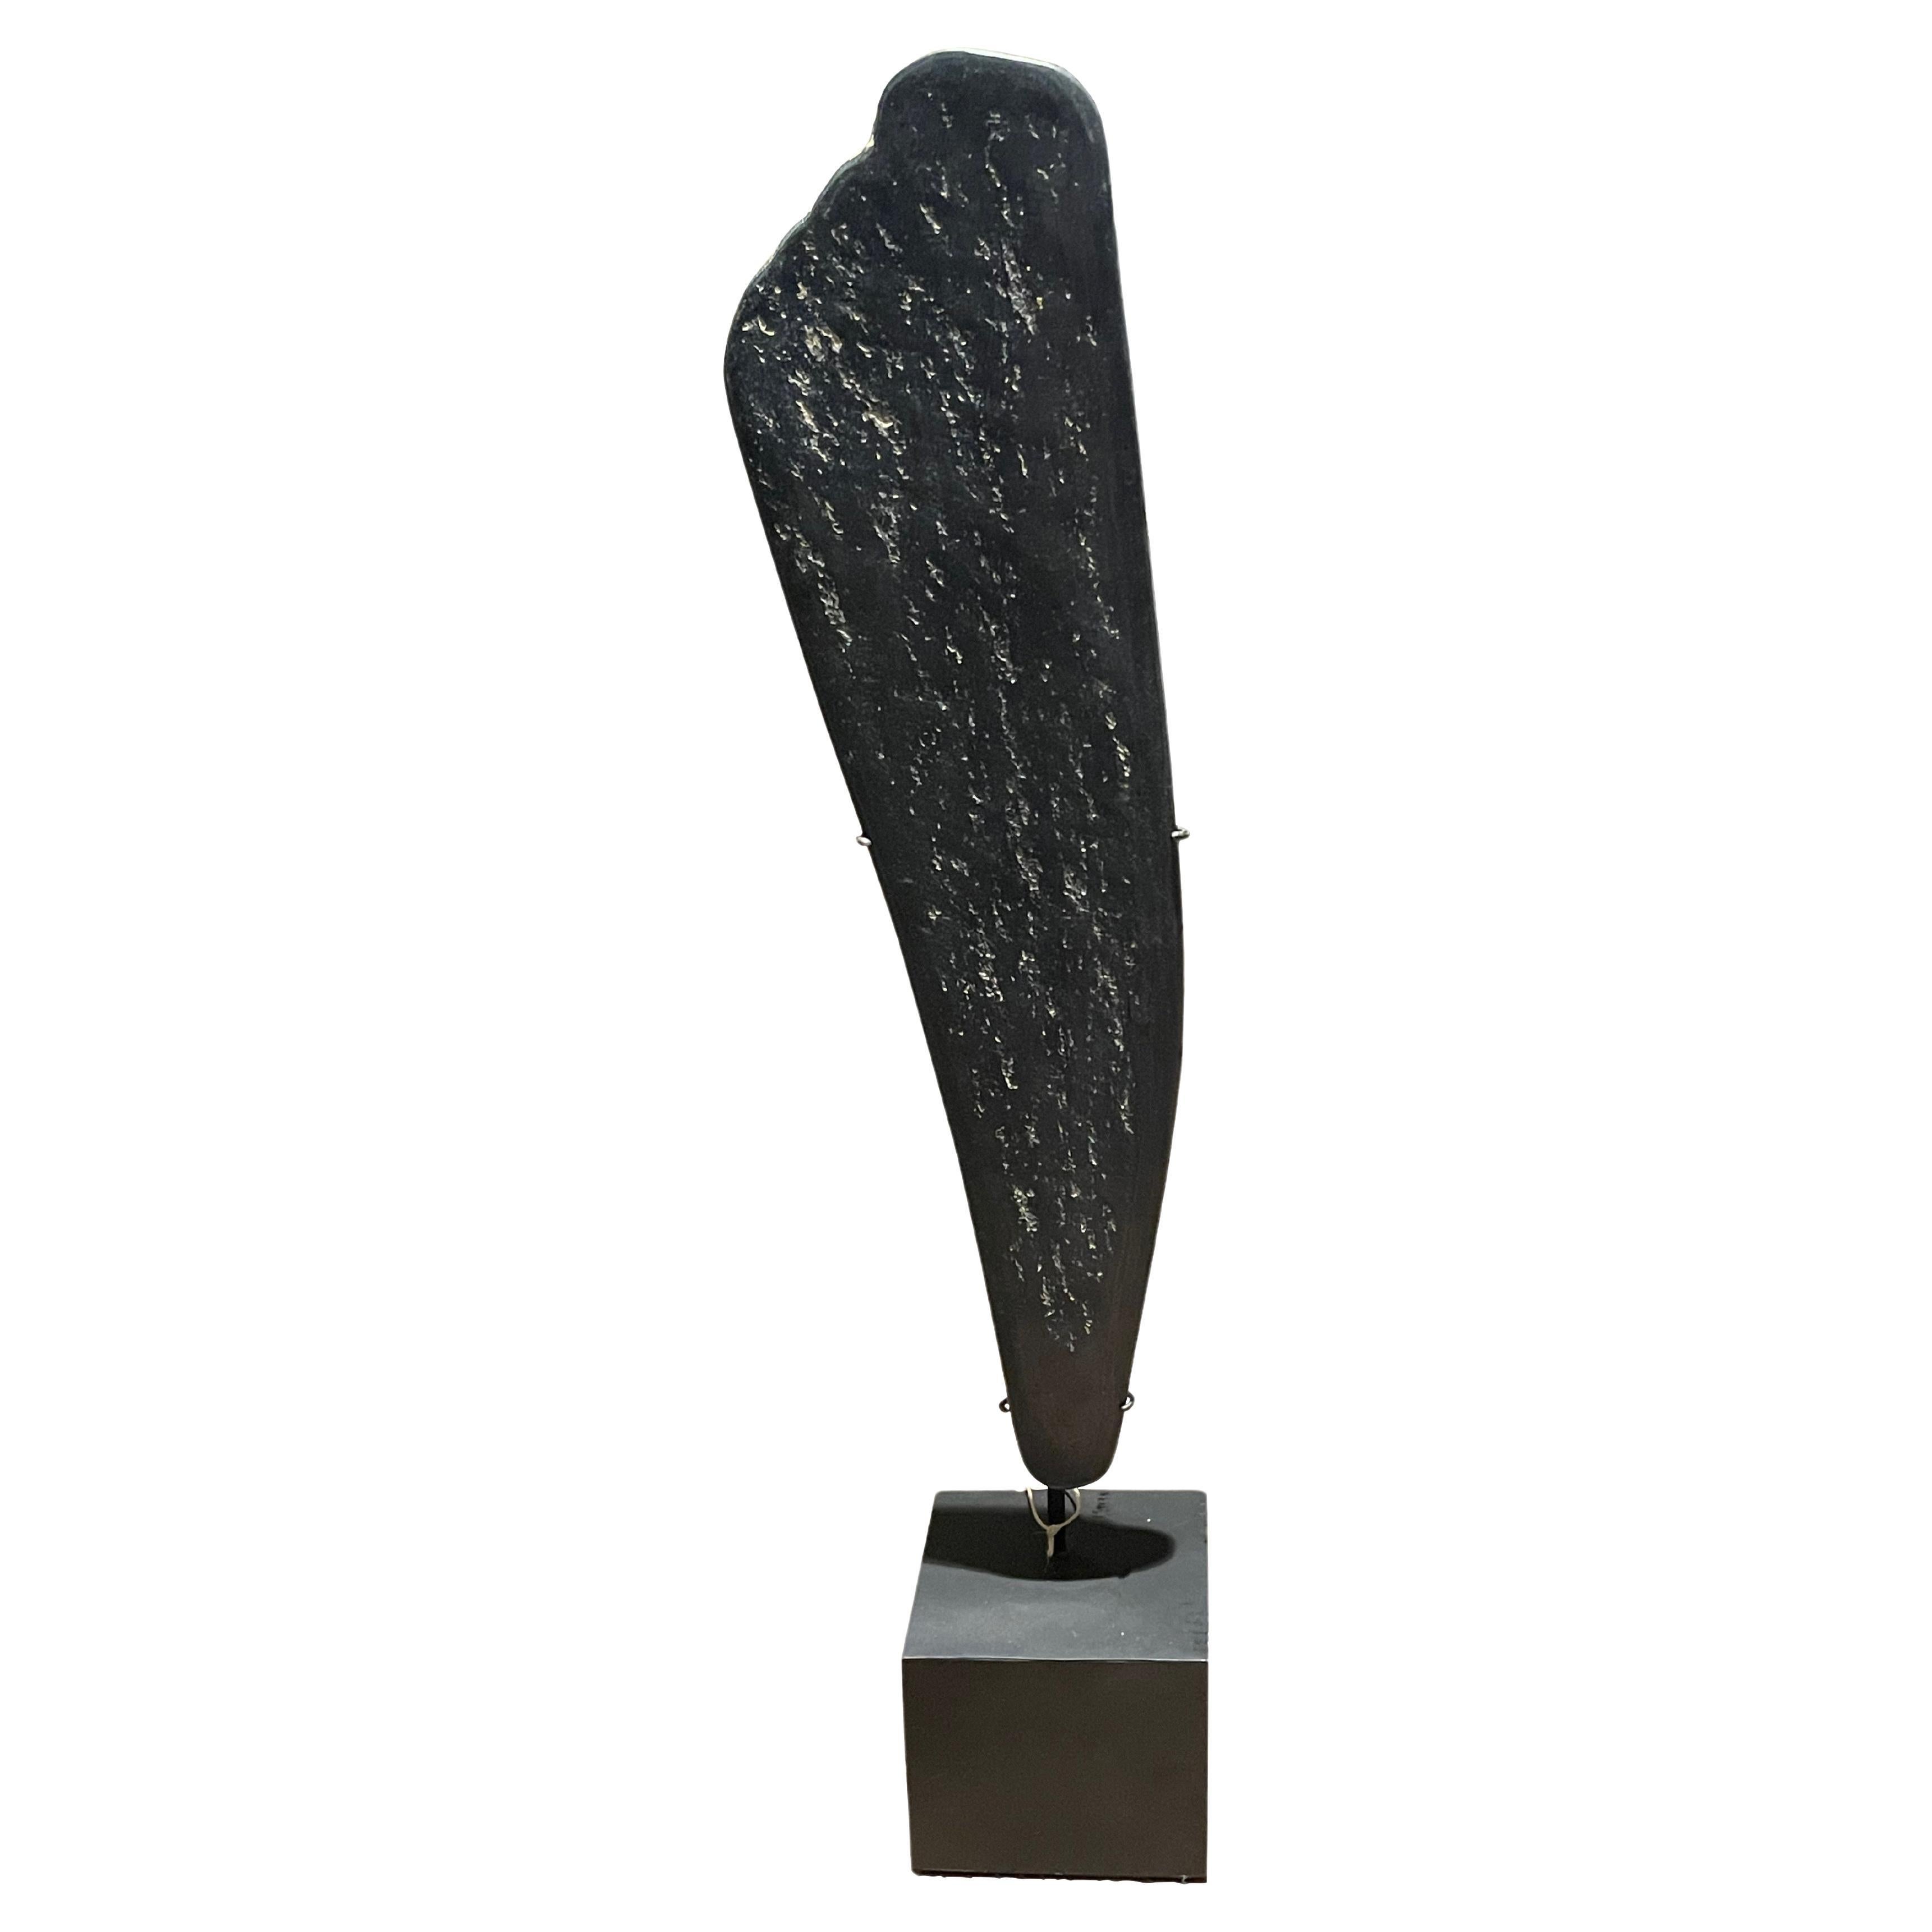 Black With White Markings Stone Paddle Sculpture, Indonesia, 19th Century For Sale